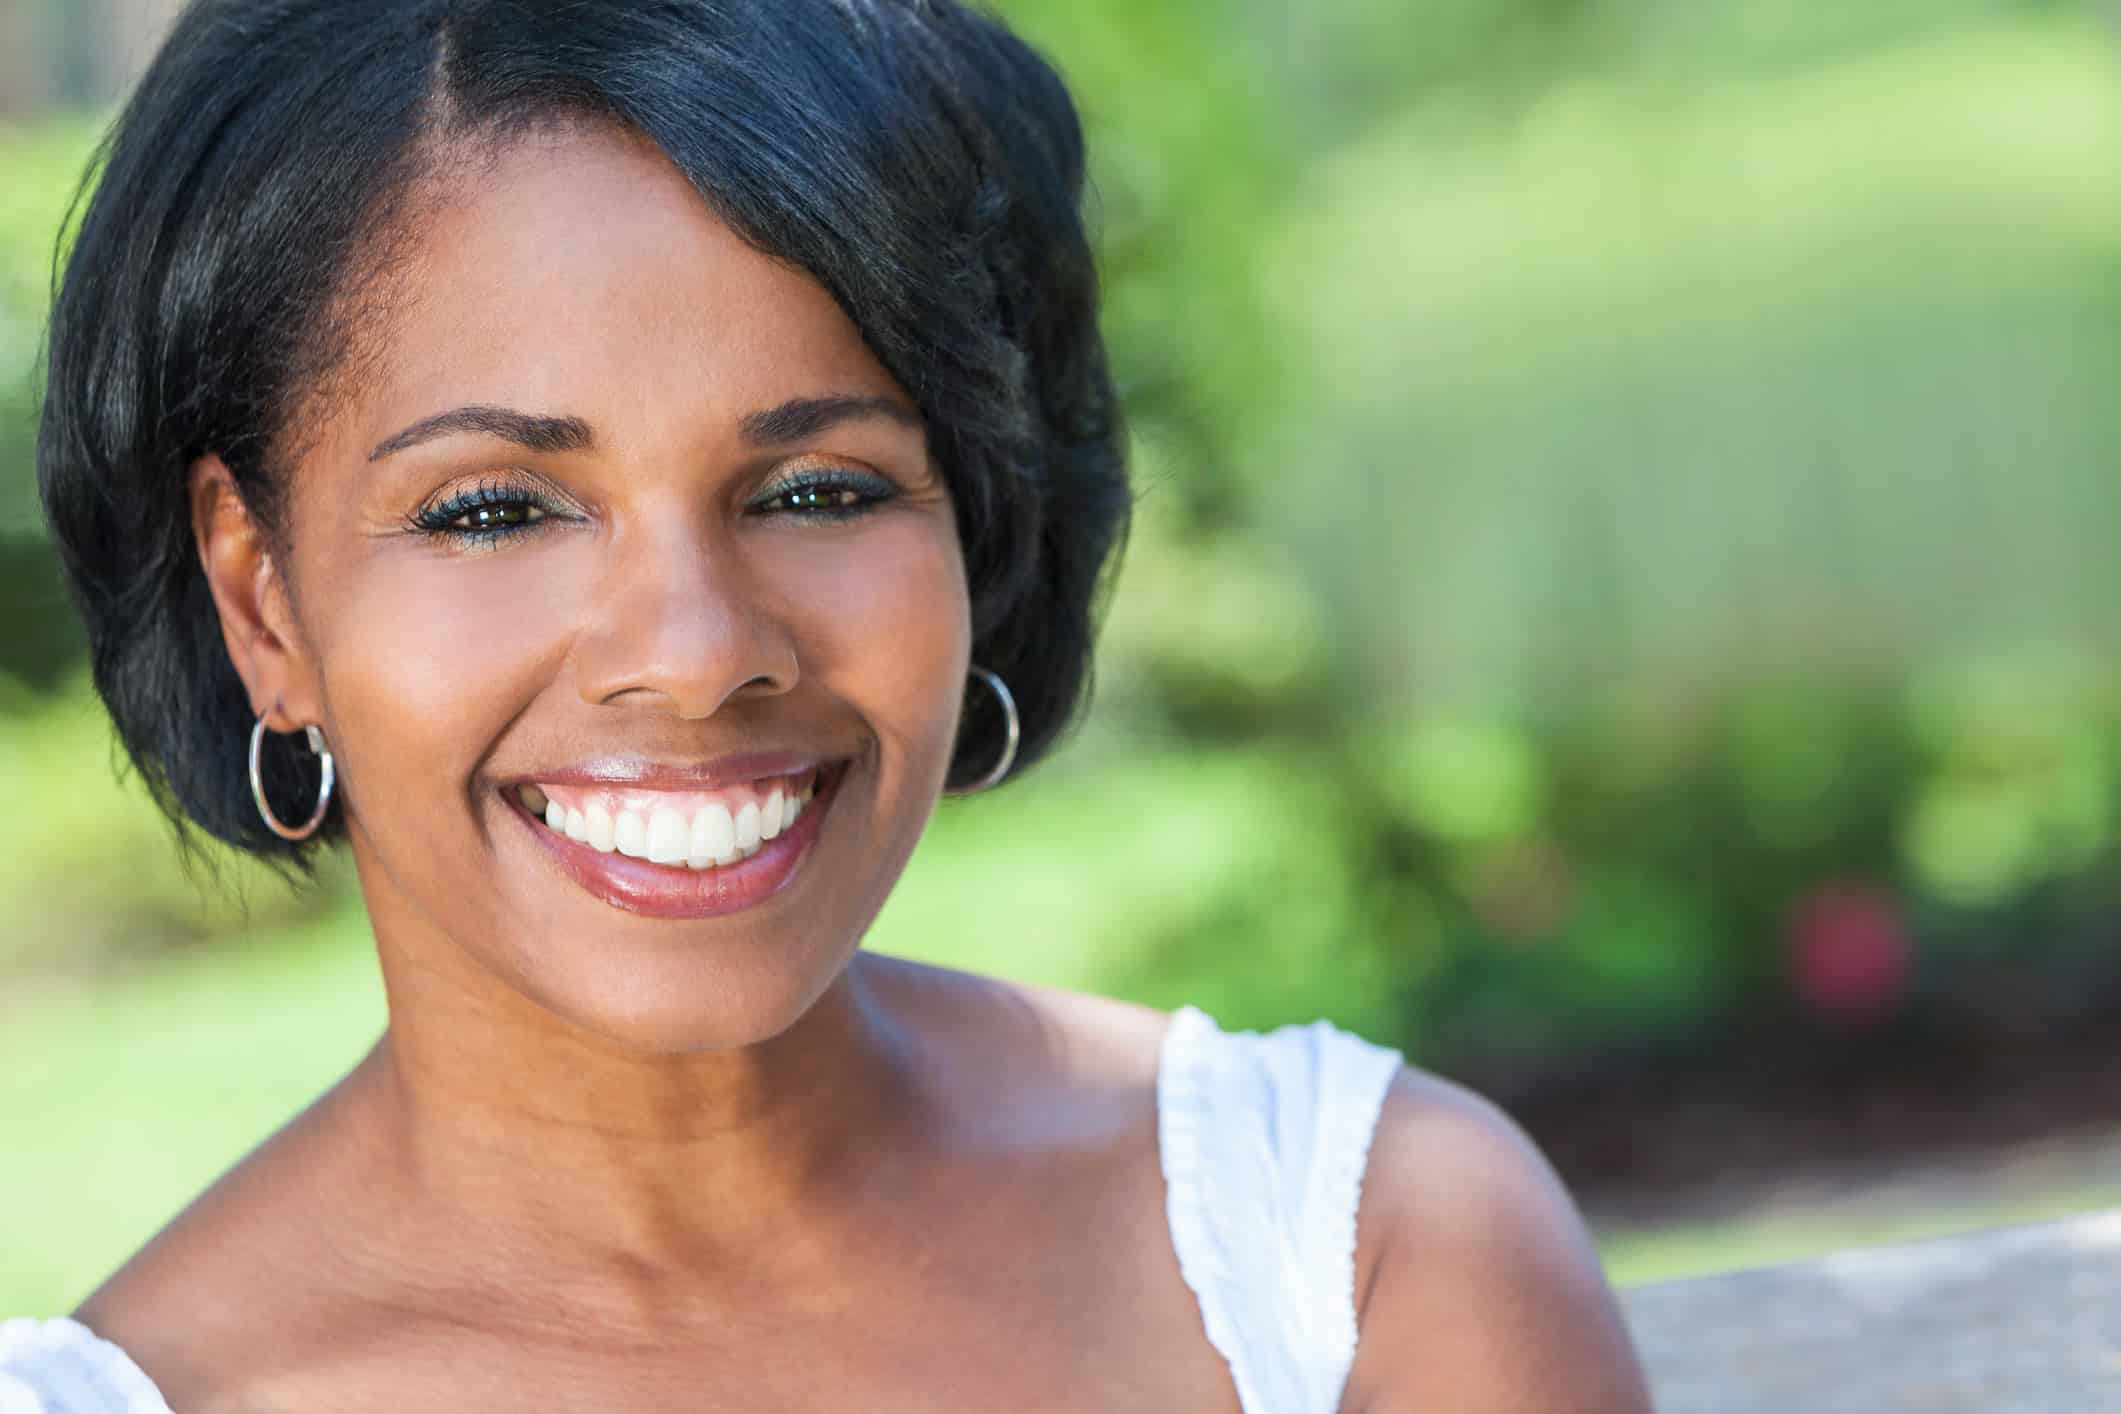 juvederm atlanta, image of a smiling middle aged woman with short black hair and wearing a white tank top with green landscape behind her.